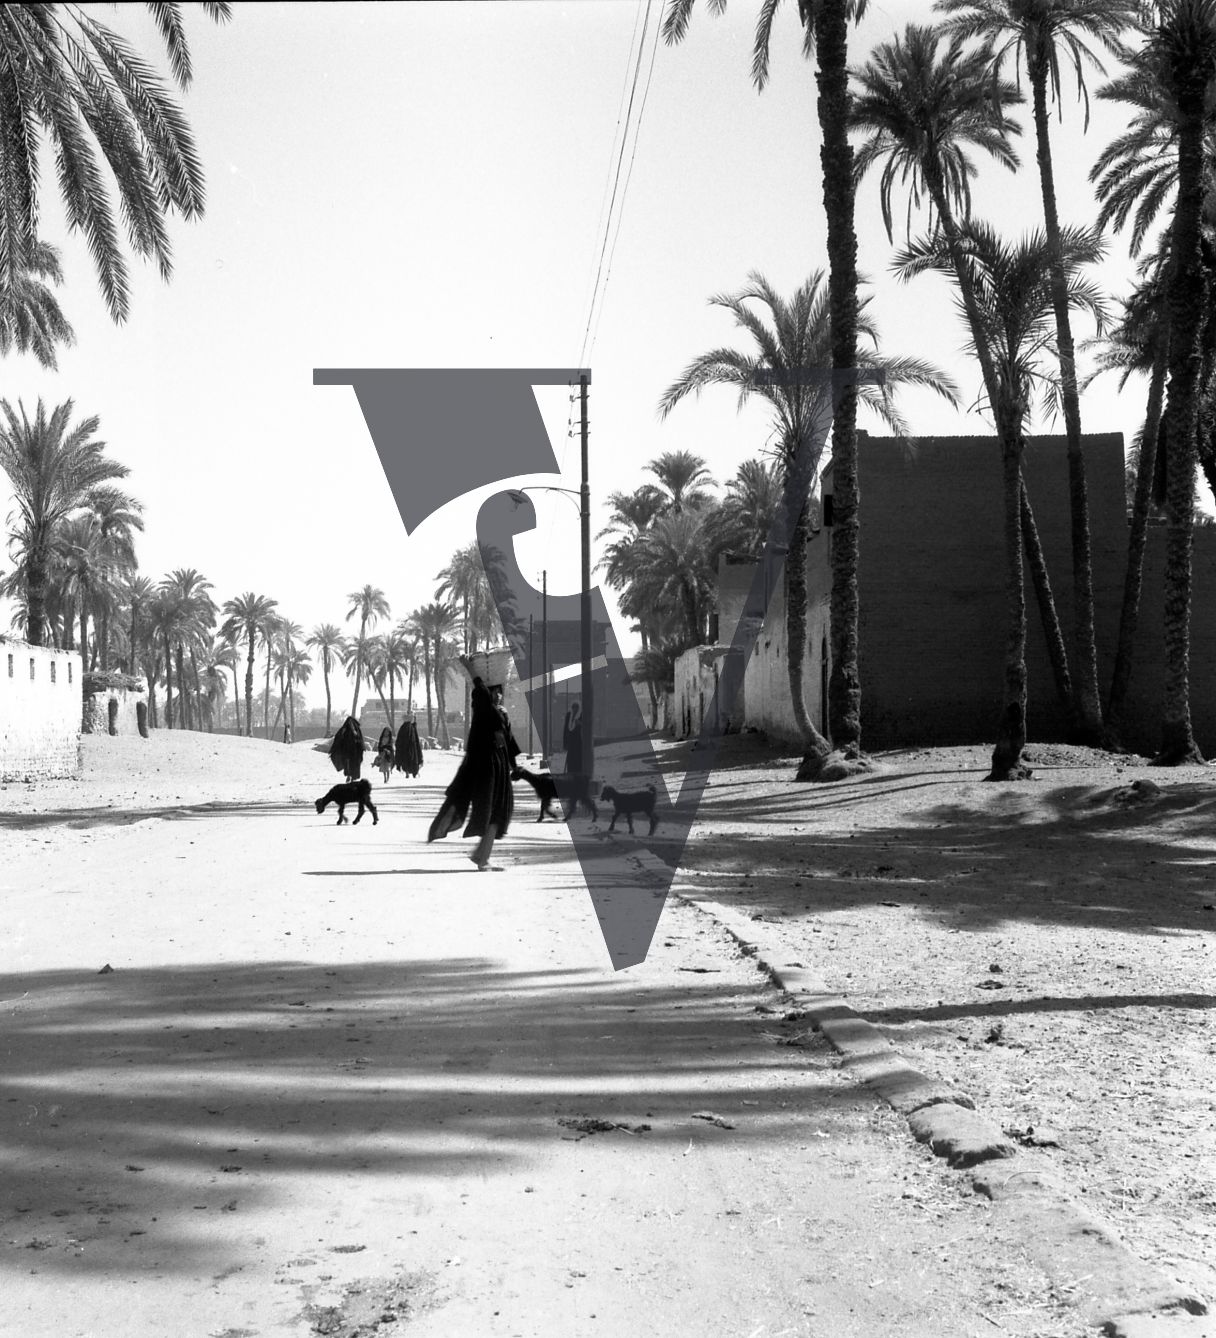 Harrania, Egypt, streetview with people and palms.